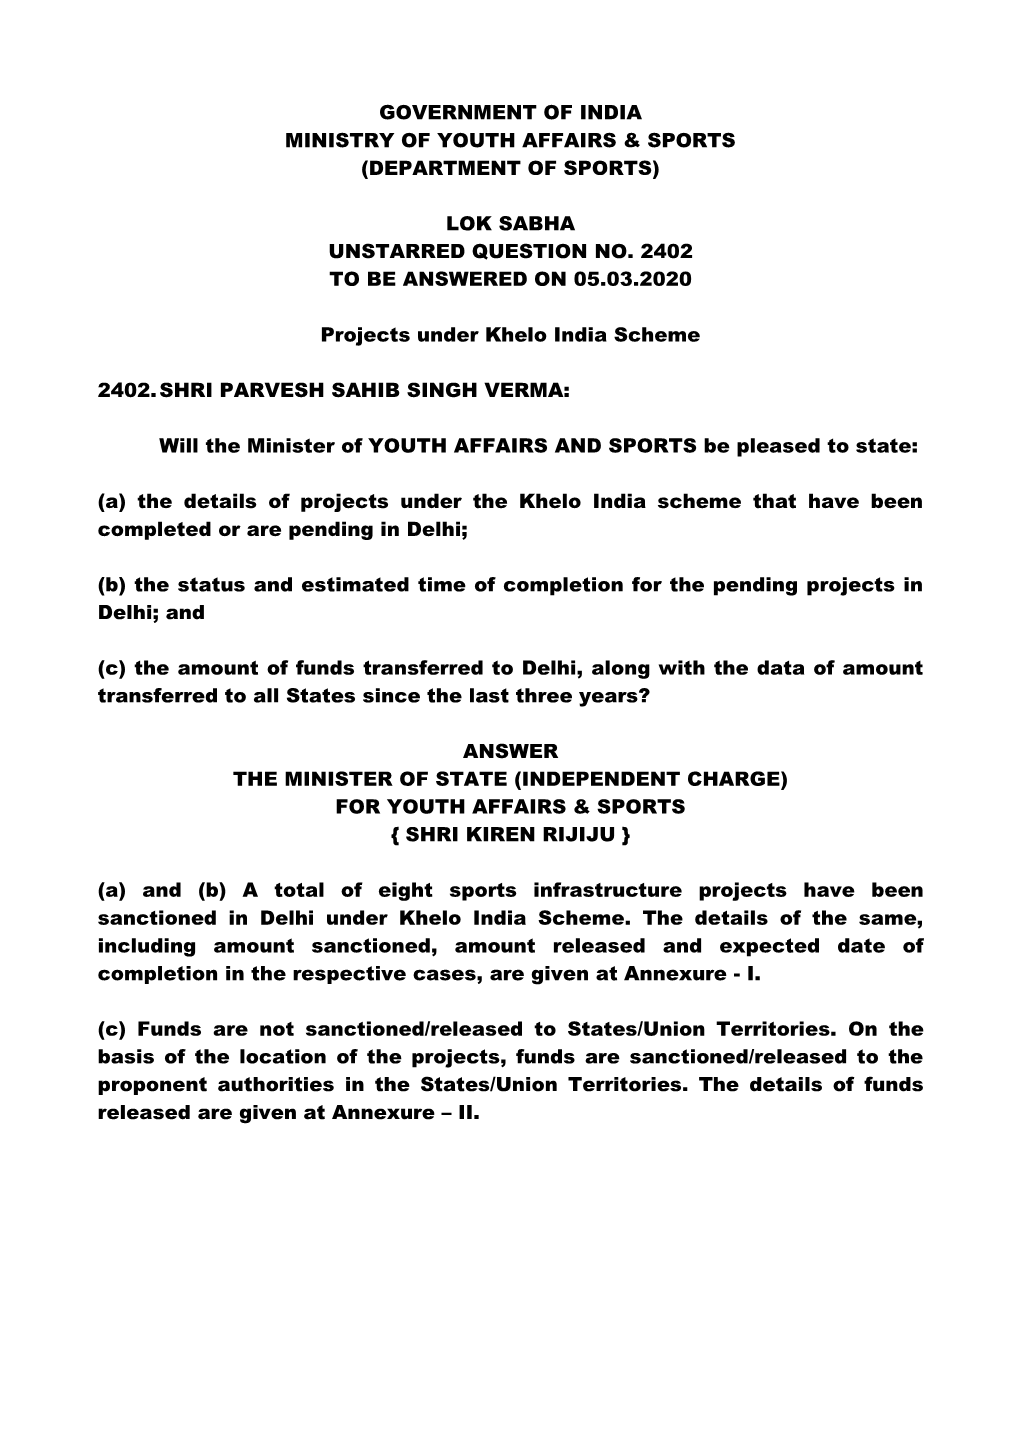 Lok Sabha Unstarred Question No. 2402 to Be Answered on 05.03.2020